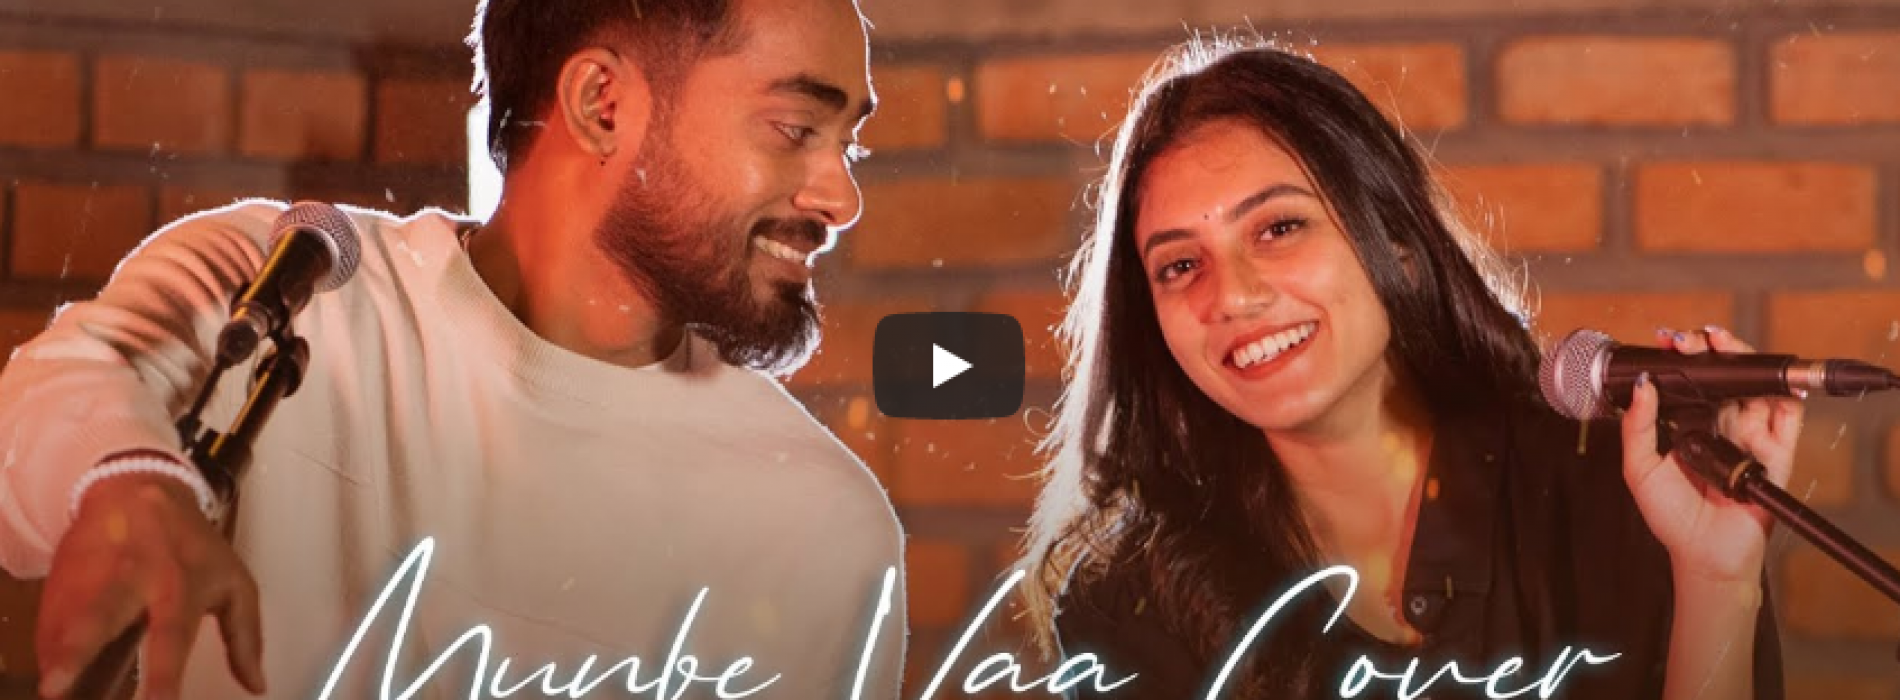 New Music : Munbe Vaa | Cover Version | @Dinesh Gamage Ft Shanudrie